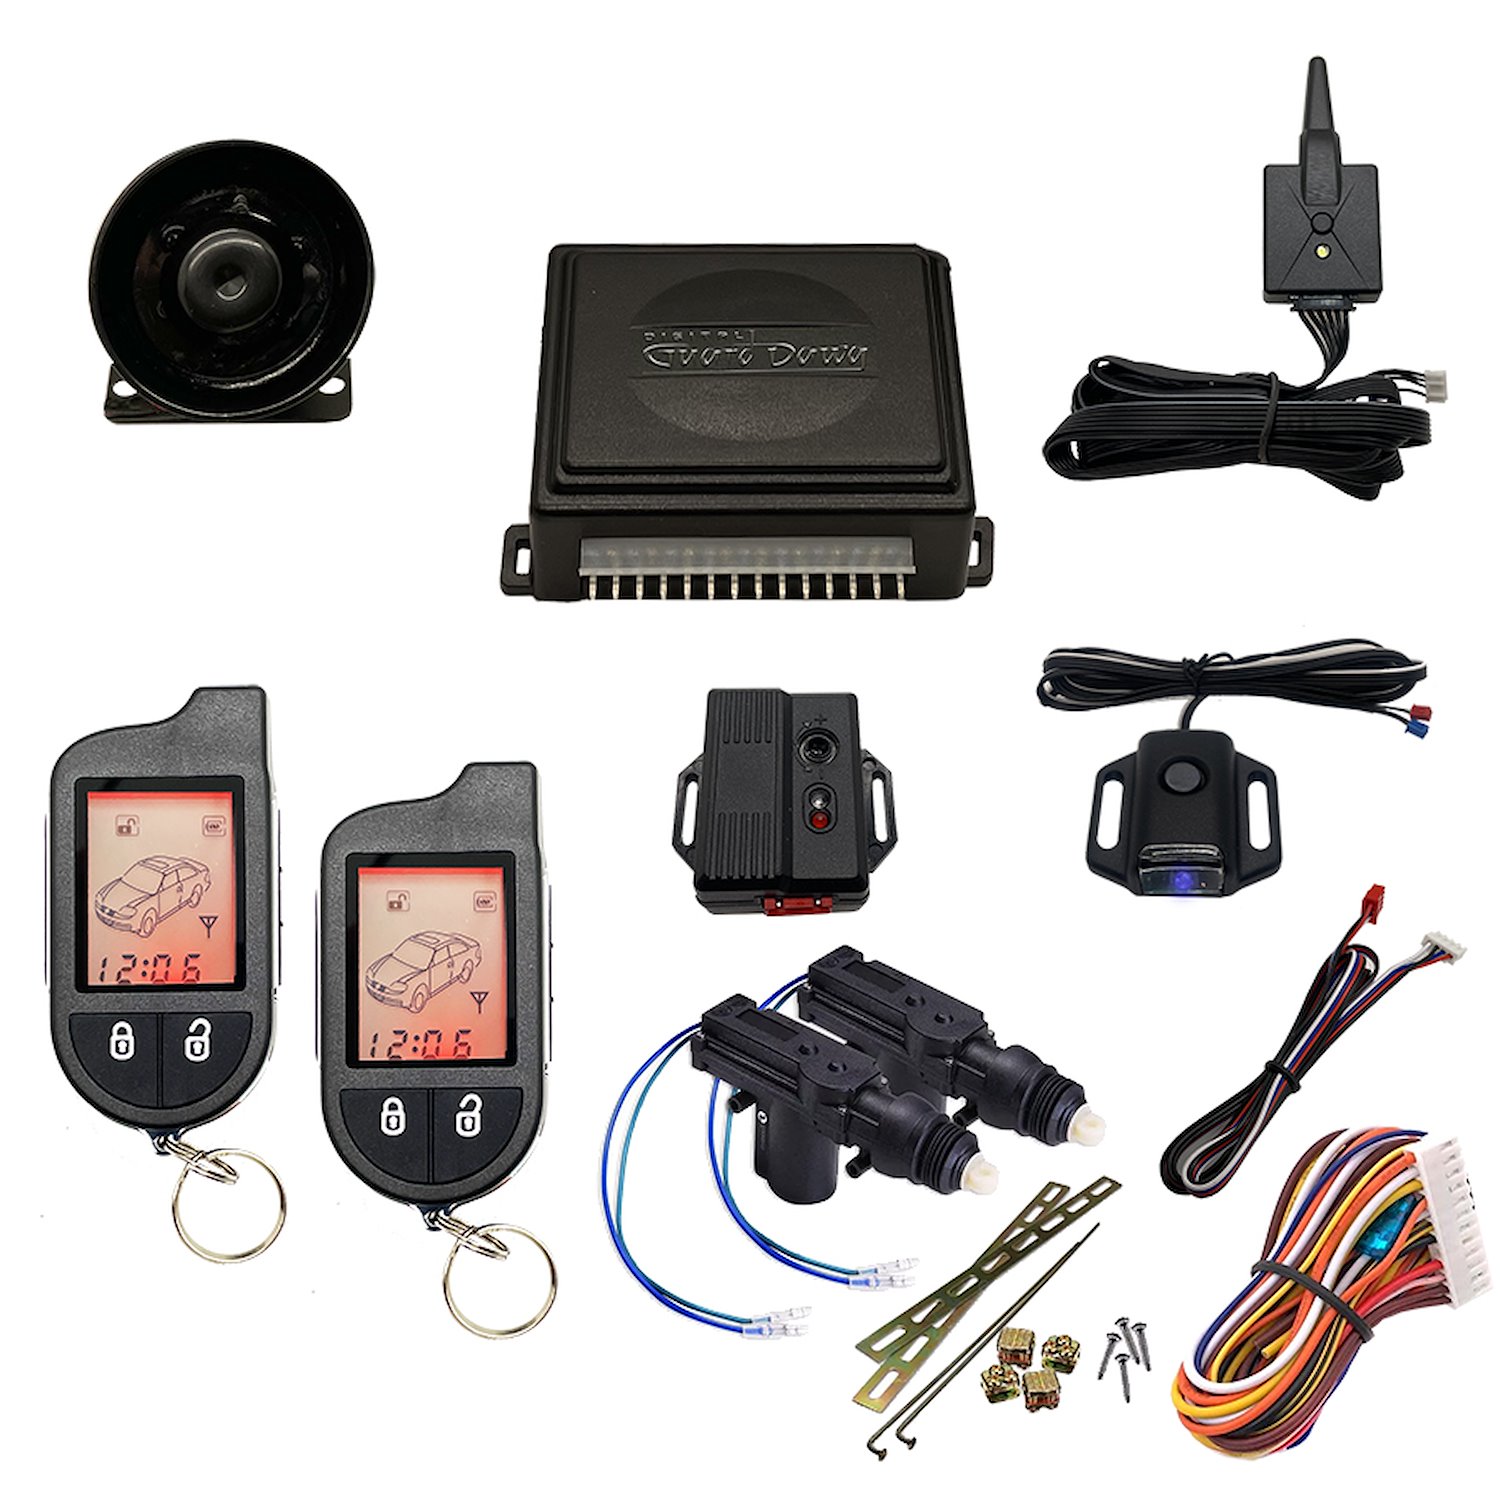 DGD-KY-ALM-2-2A Keyless Entry and Alarm System, 2-Way w/2-Door Actuator Kit